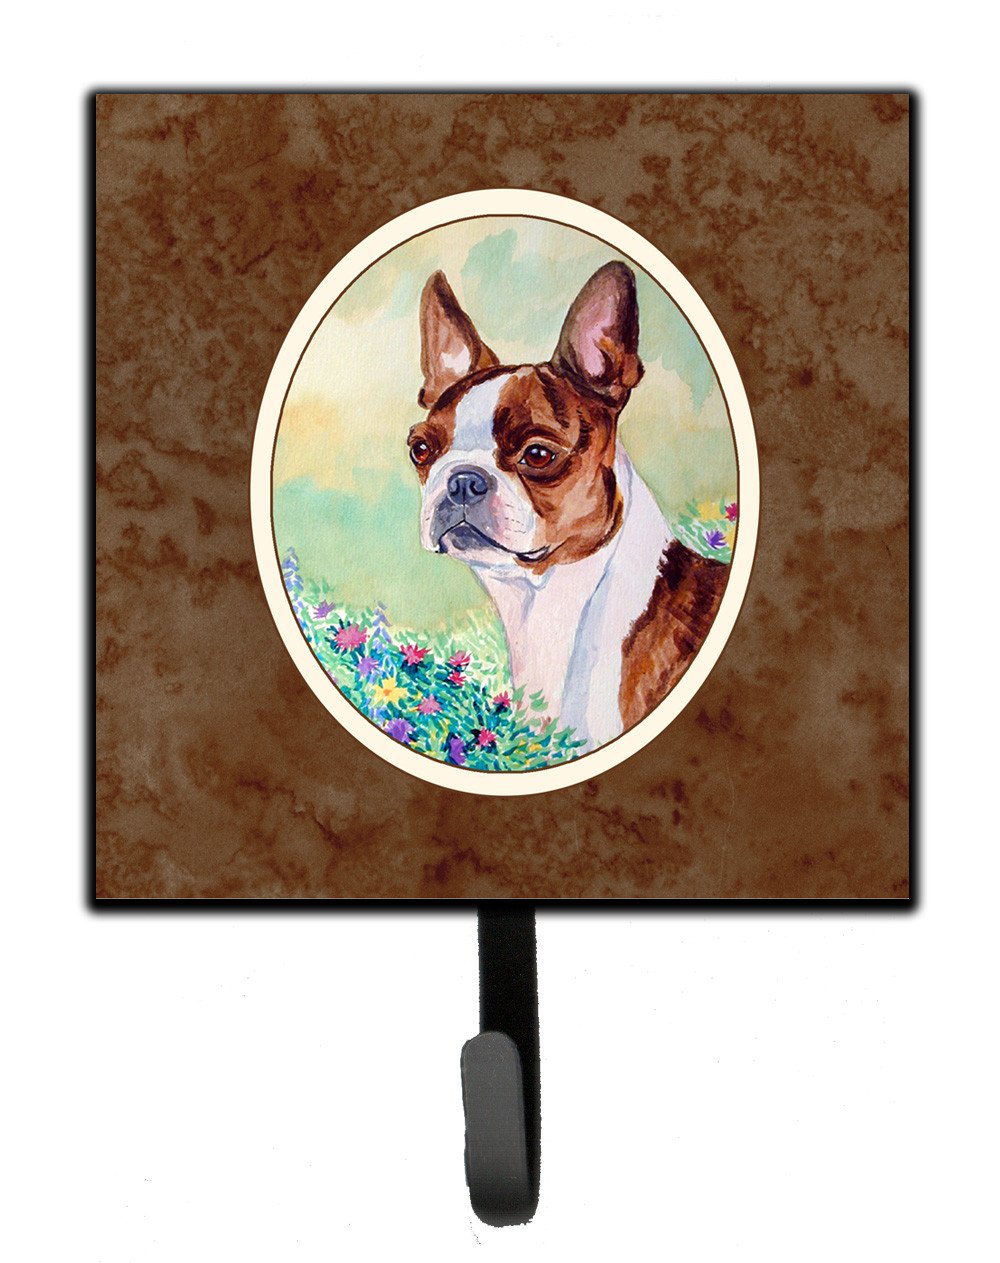 Red and White Boston Terrier Leash or Key Holder 7222SH4 by Caroline's Treasures